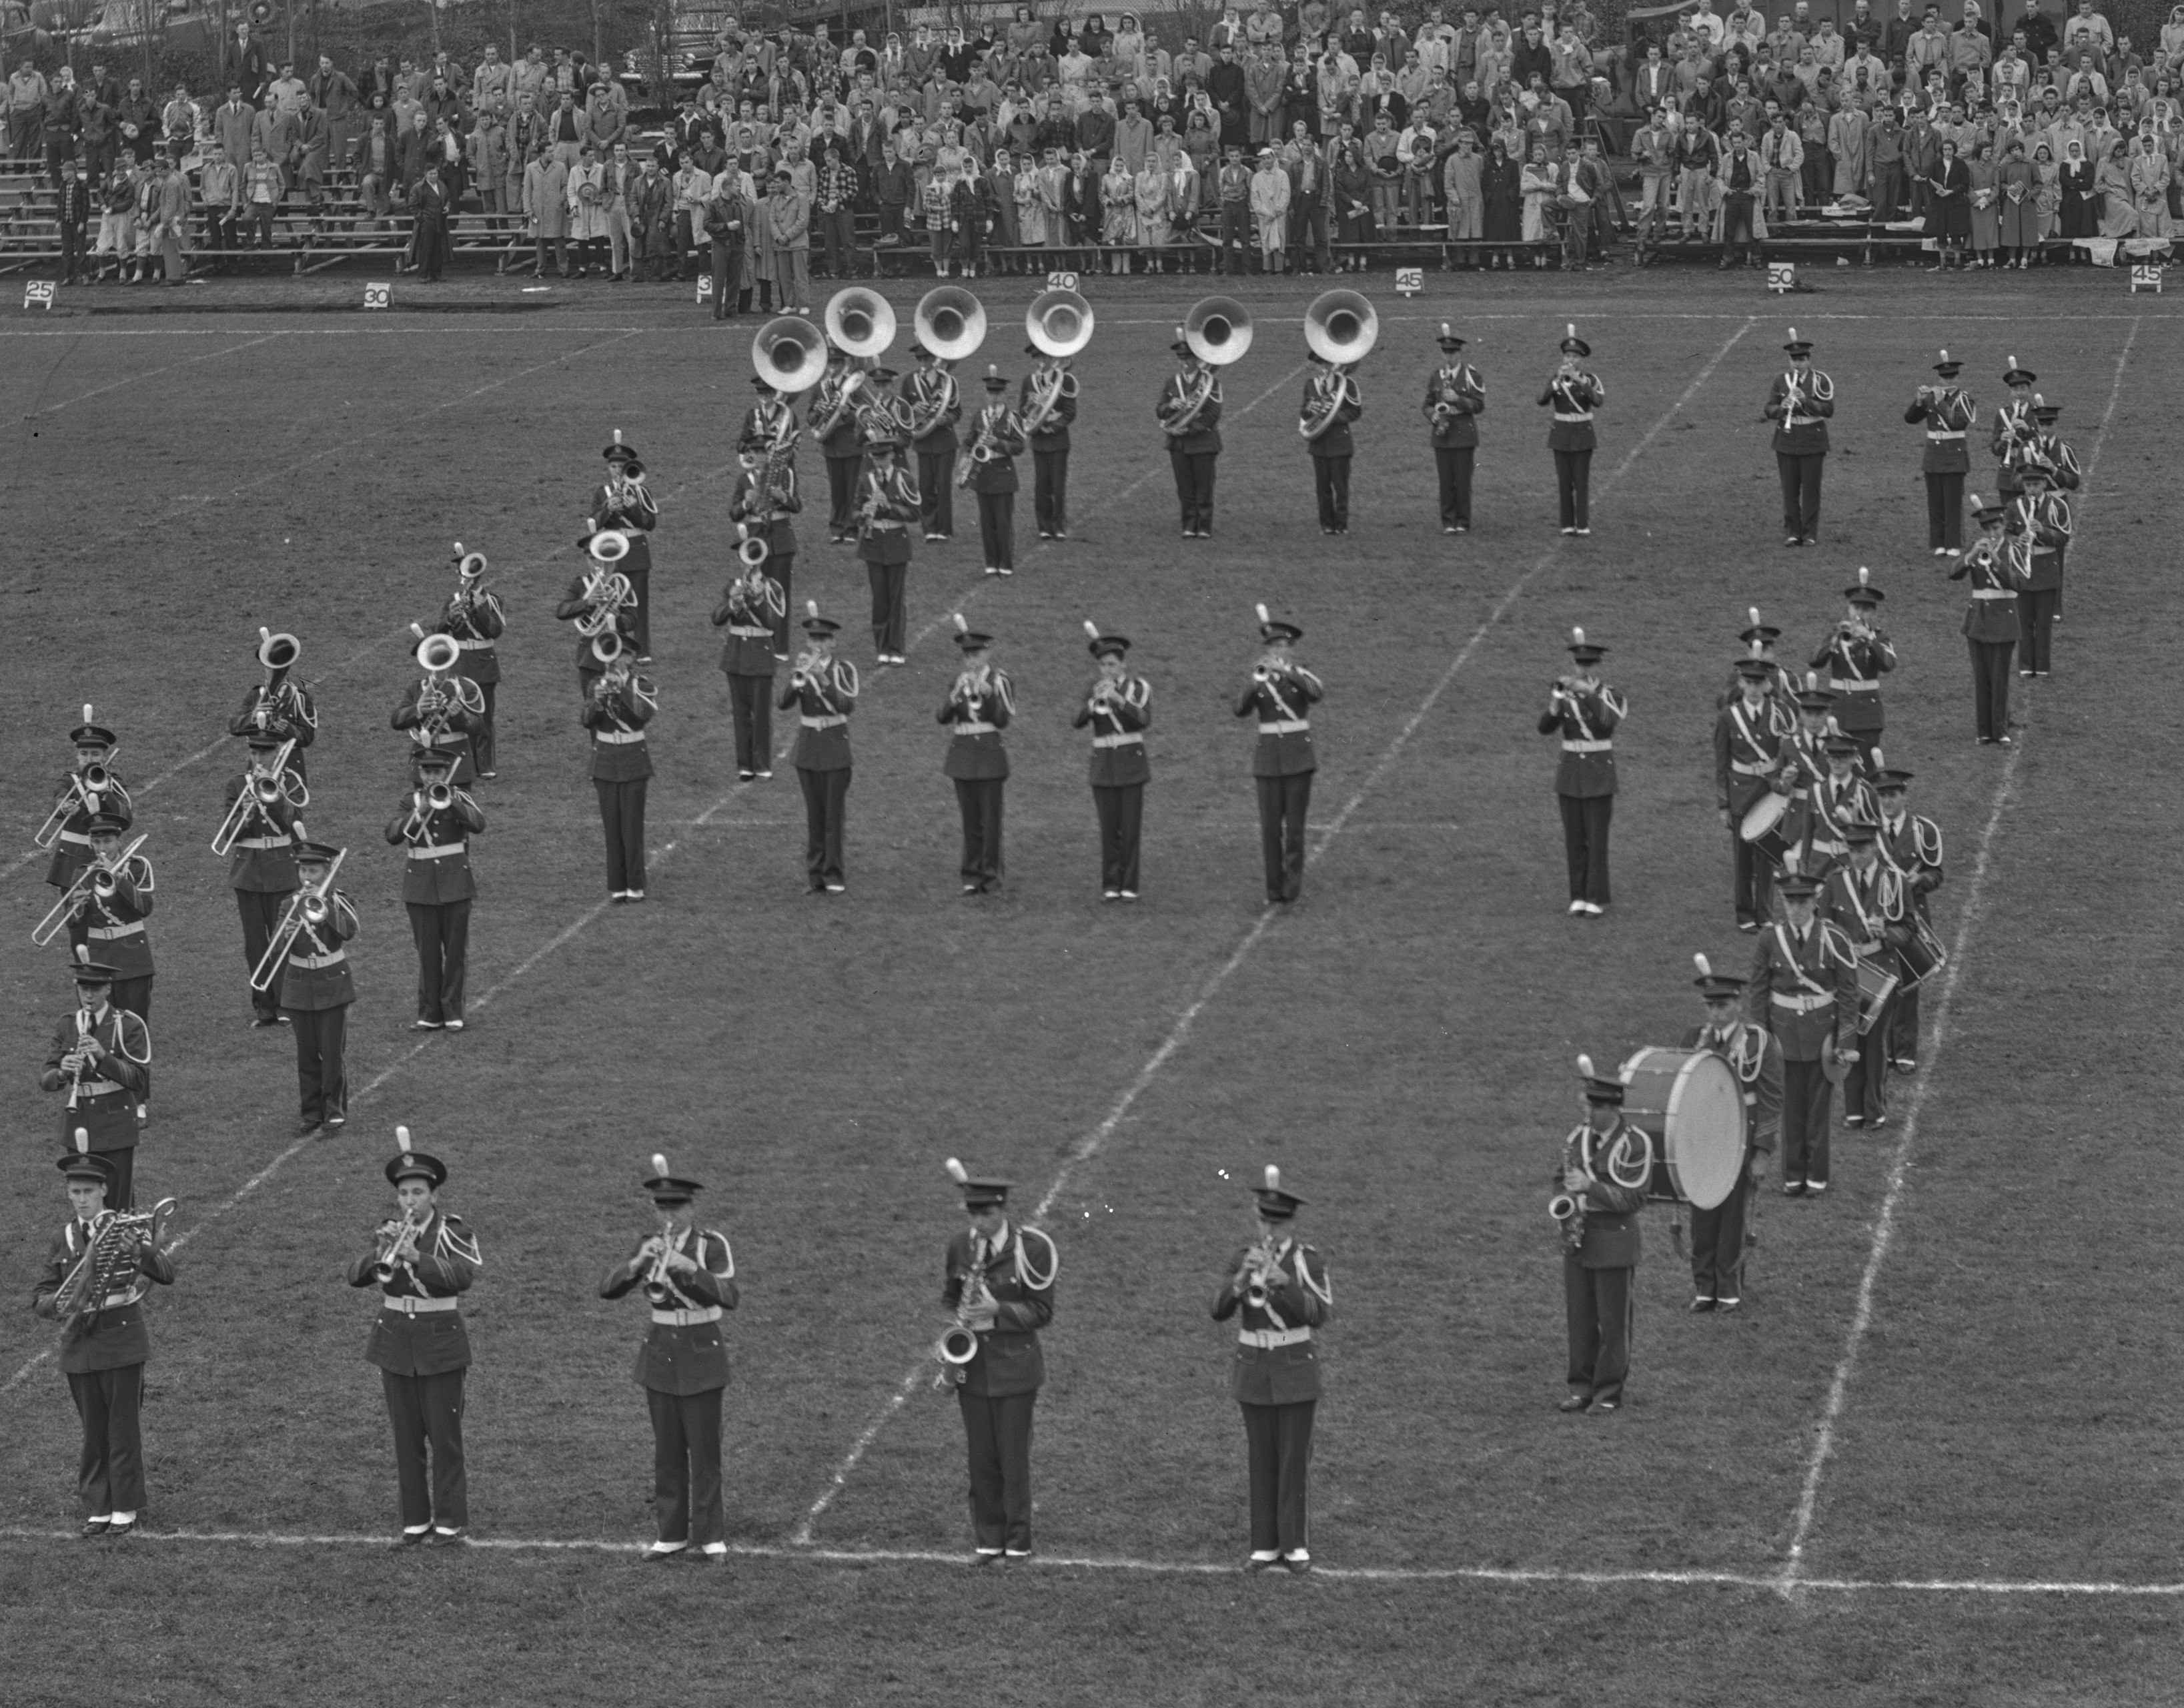 Historic photo from 1940s shows BGSU marking band in a block B formation